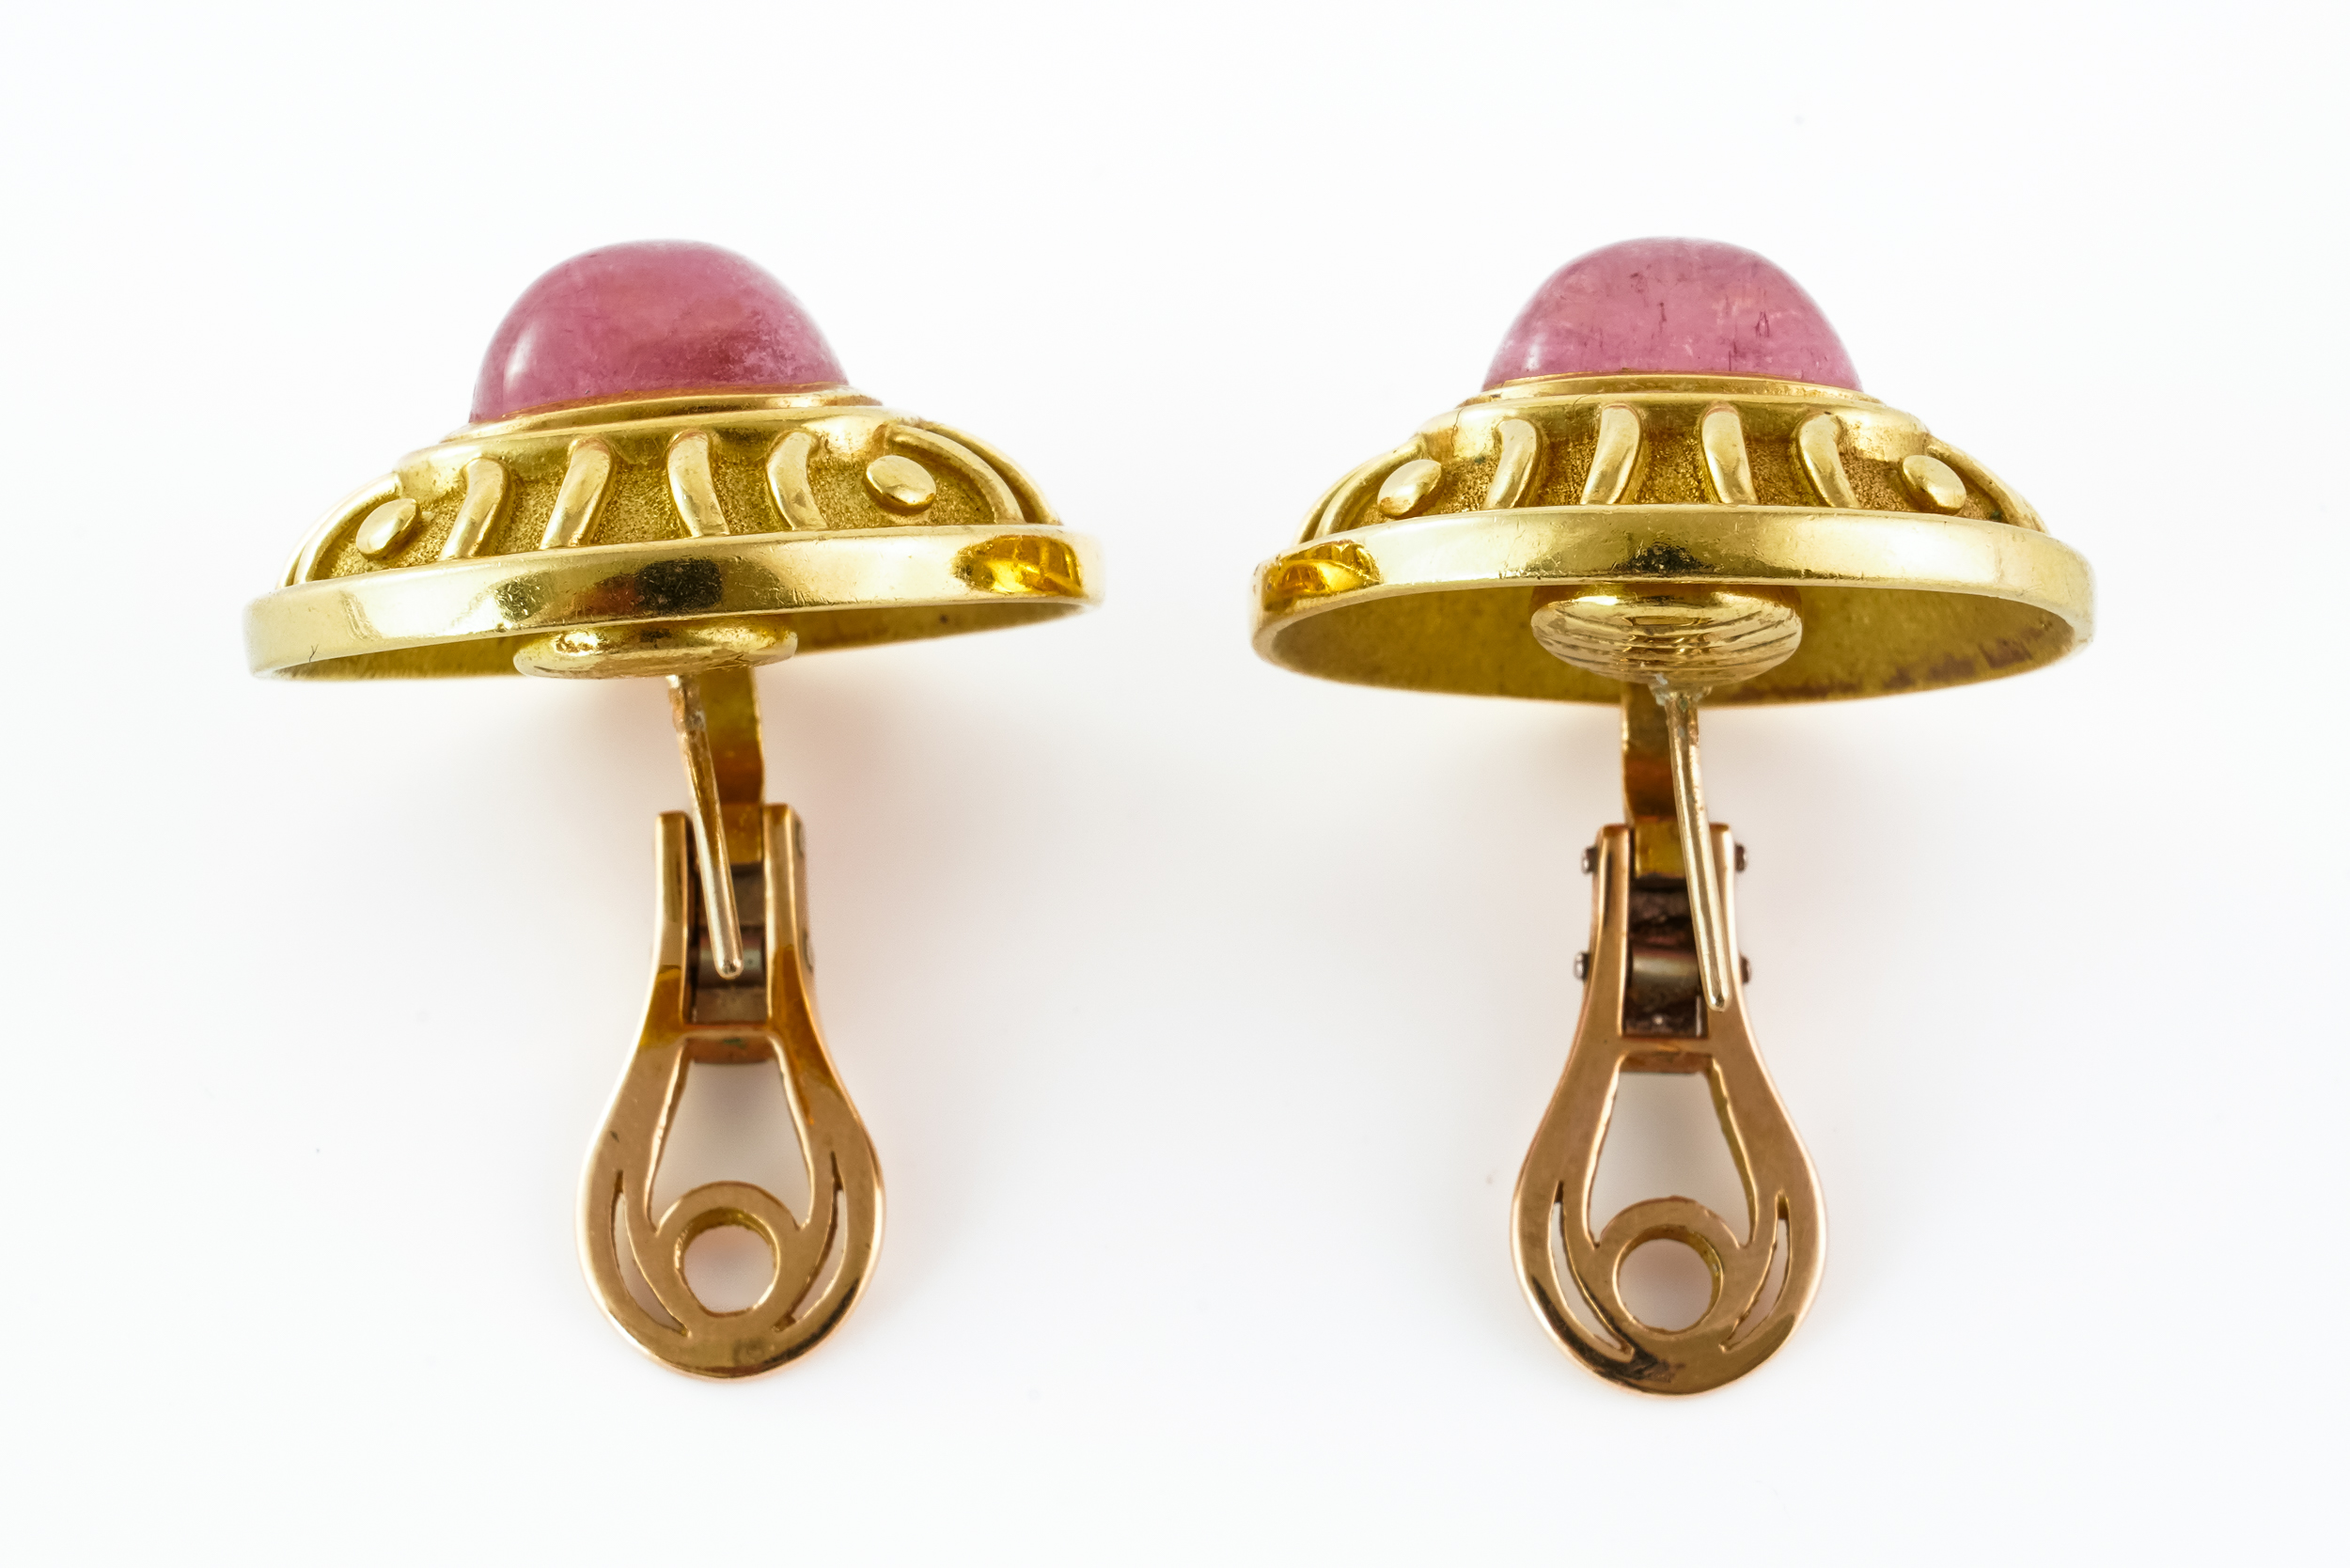 A DE VROOMEN PAIR OF 18CT GOLD AND CABOCHON PINK TOURMALINE EARCLIPS - Image 3 of 3